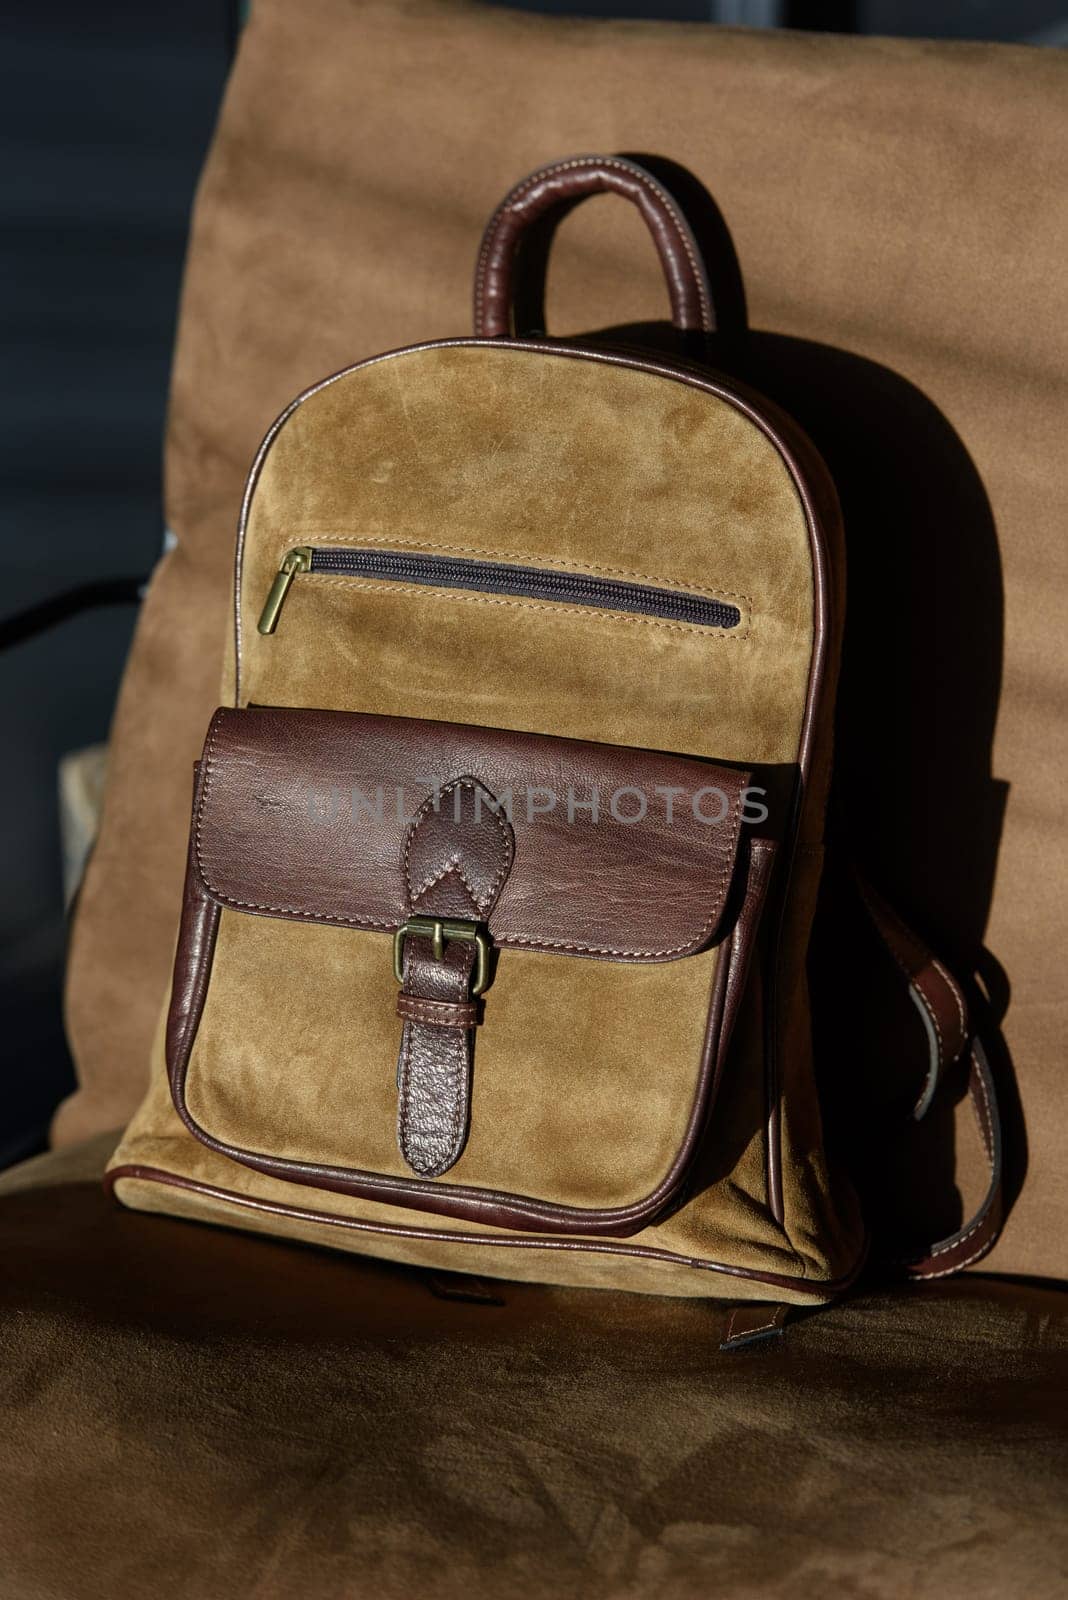 leather backpack on chair, close up. by Ashtray25